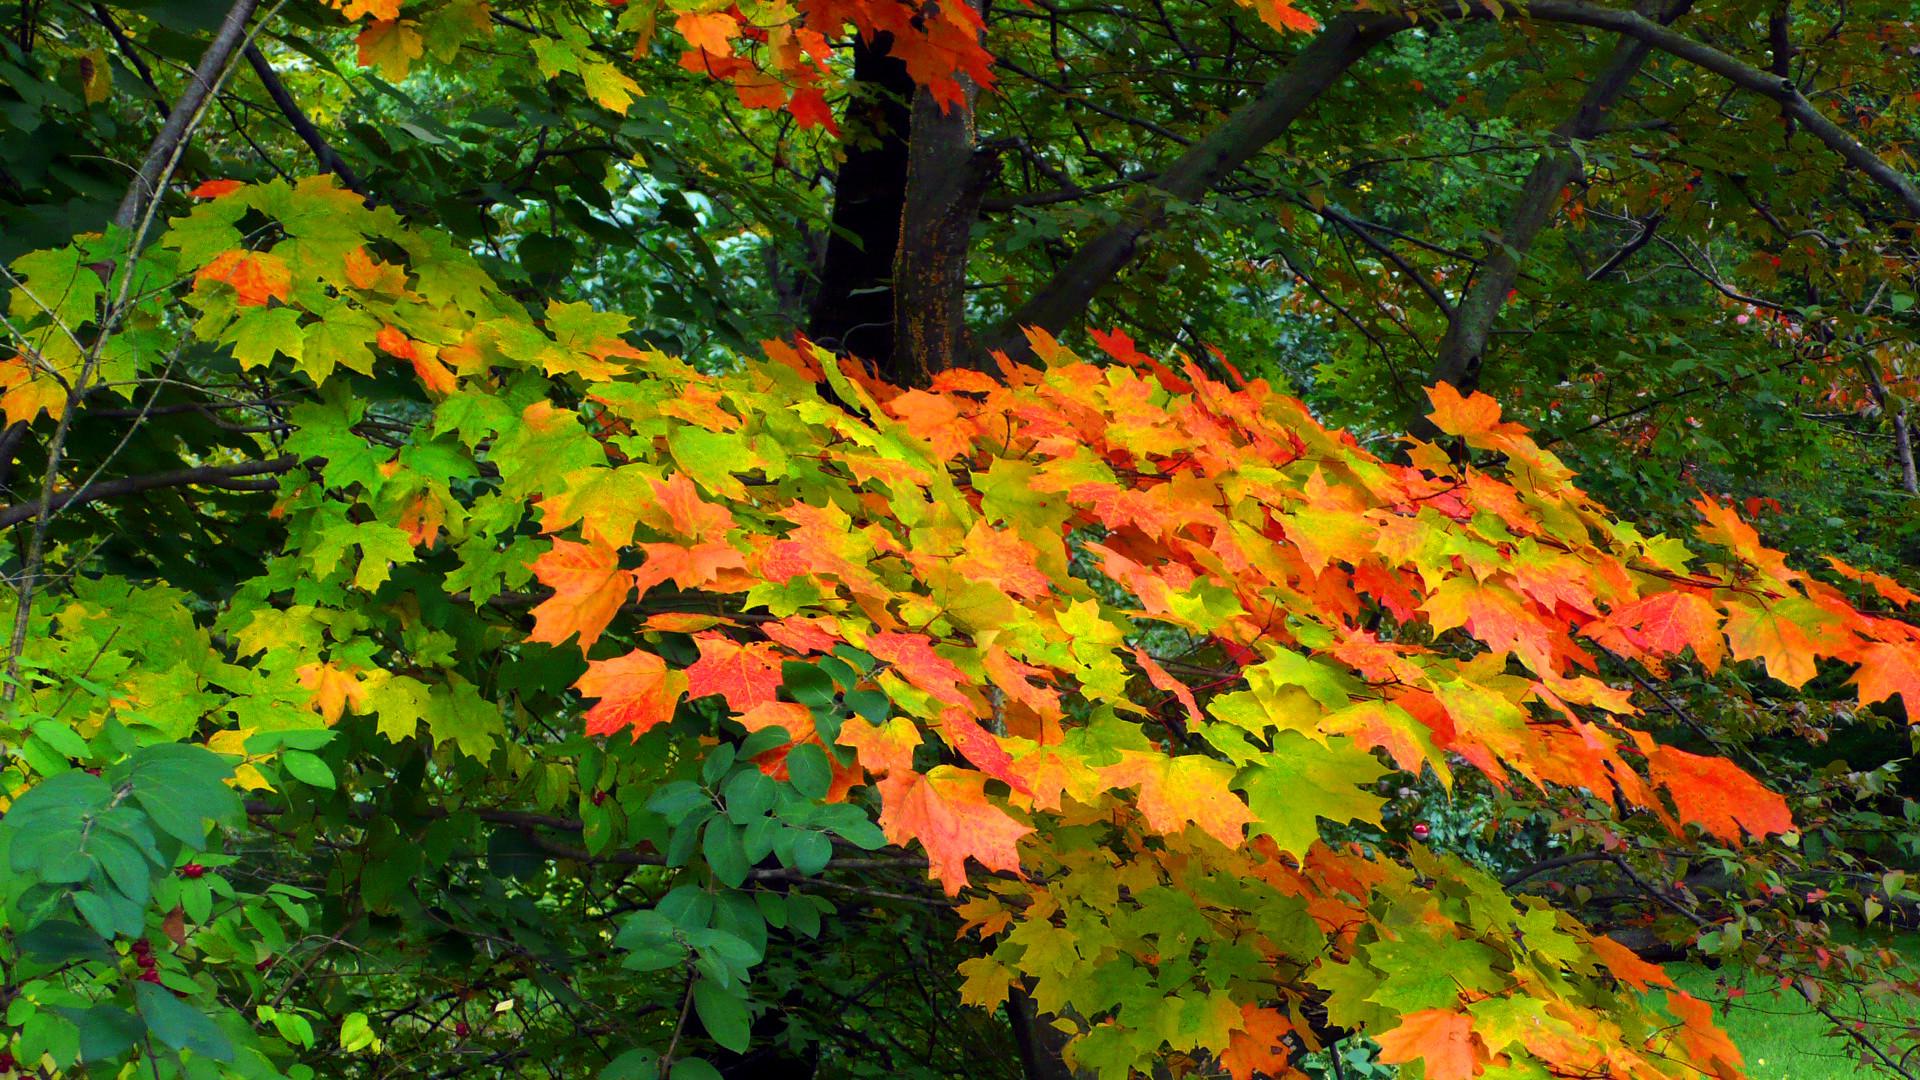 Fall definition. Природа осень листопад. Early Fall. Colors of autumn 94. Leaves and Bark on the ground.